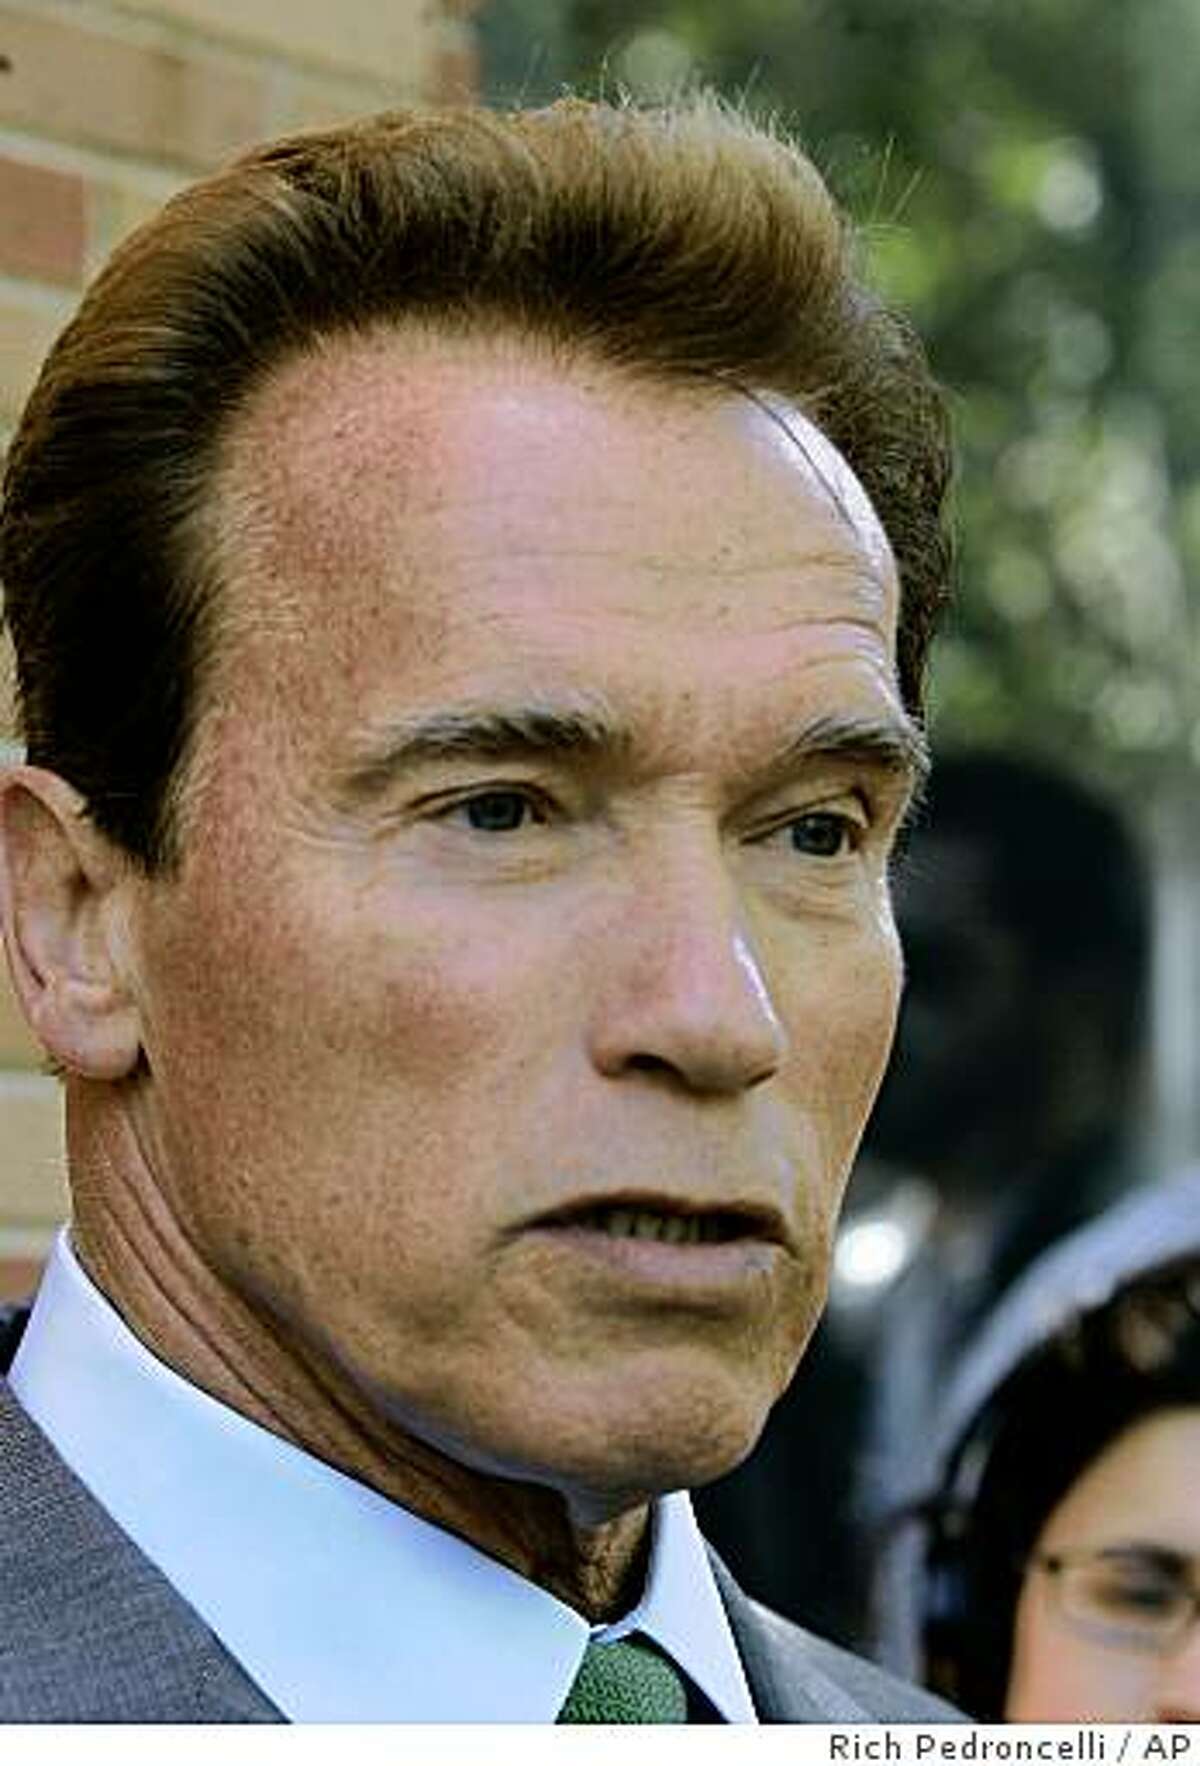 Gov. Arnold Schwarzengger tells reporters that he and lawmakers will try to quickly solve the state's $21.3 billion budget deficit without taxes, gimmicks or much borrowing, after appearing at a prayer breakfast in Sacramento, Calif., Thursday, May 21, 2009. (AP Photo/Rich Pedroncelli)